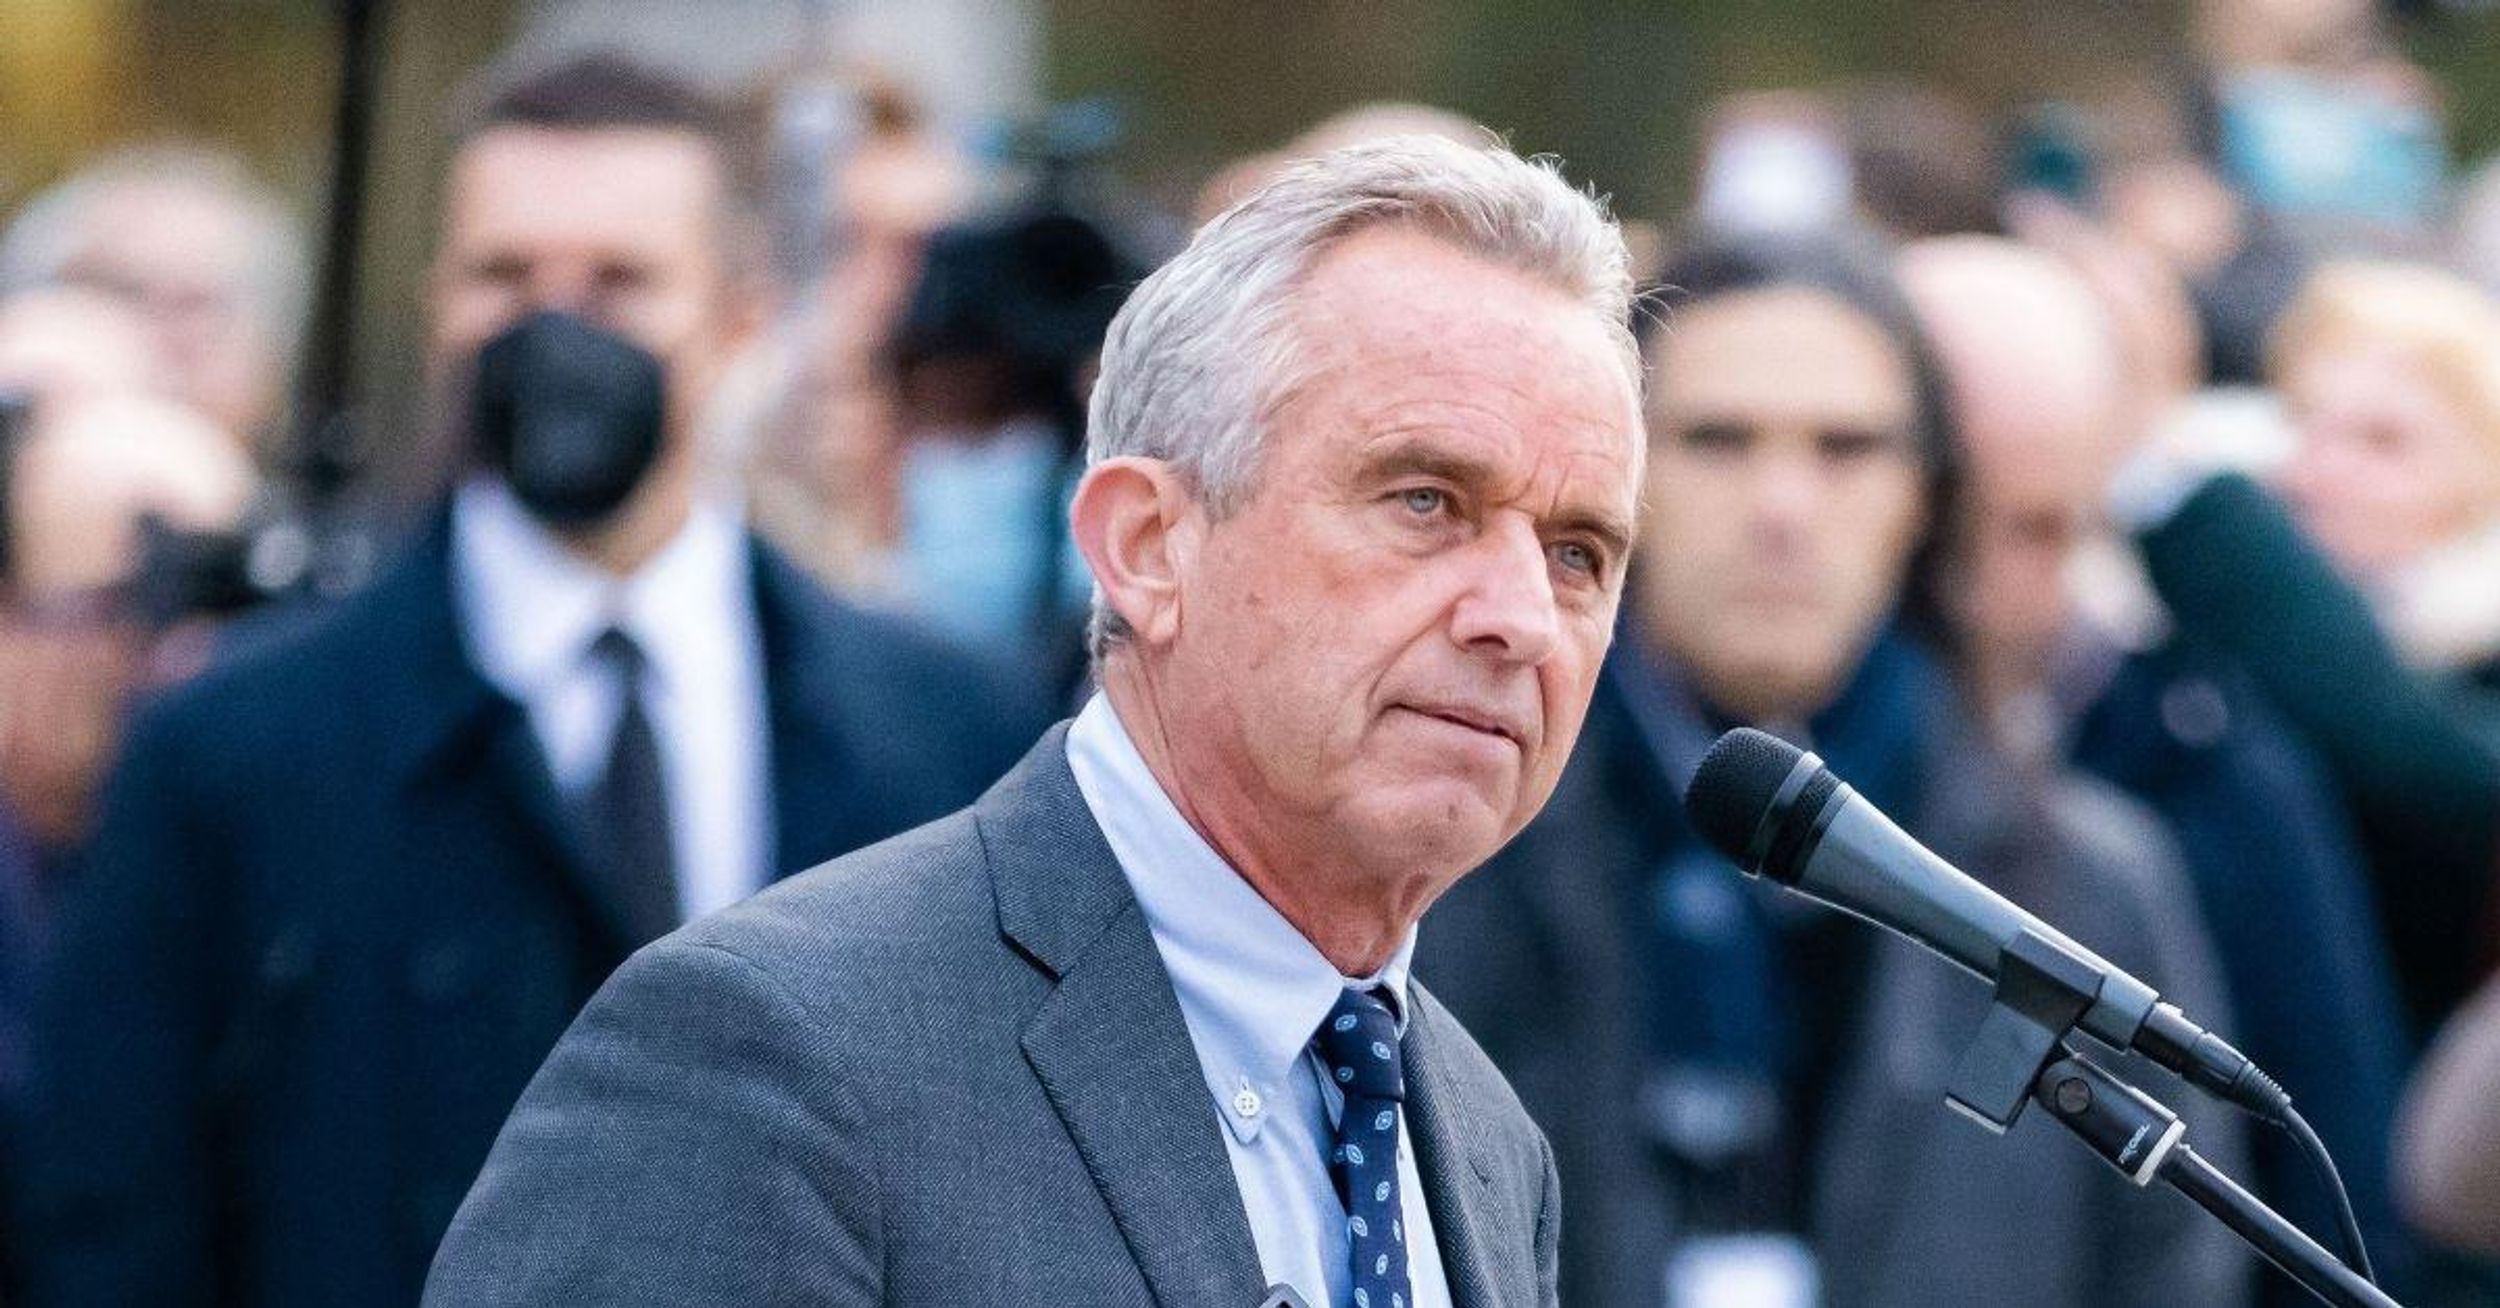 RFK Jr. Blasted For Speech Comparing Persecution Of Anti-Vaxxers To Anne Frank And Holocaust